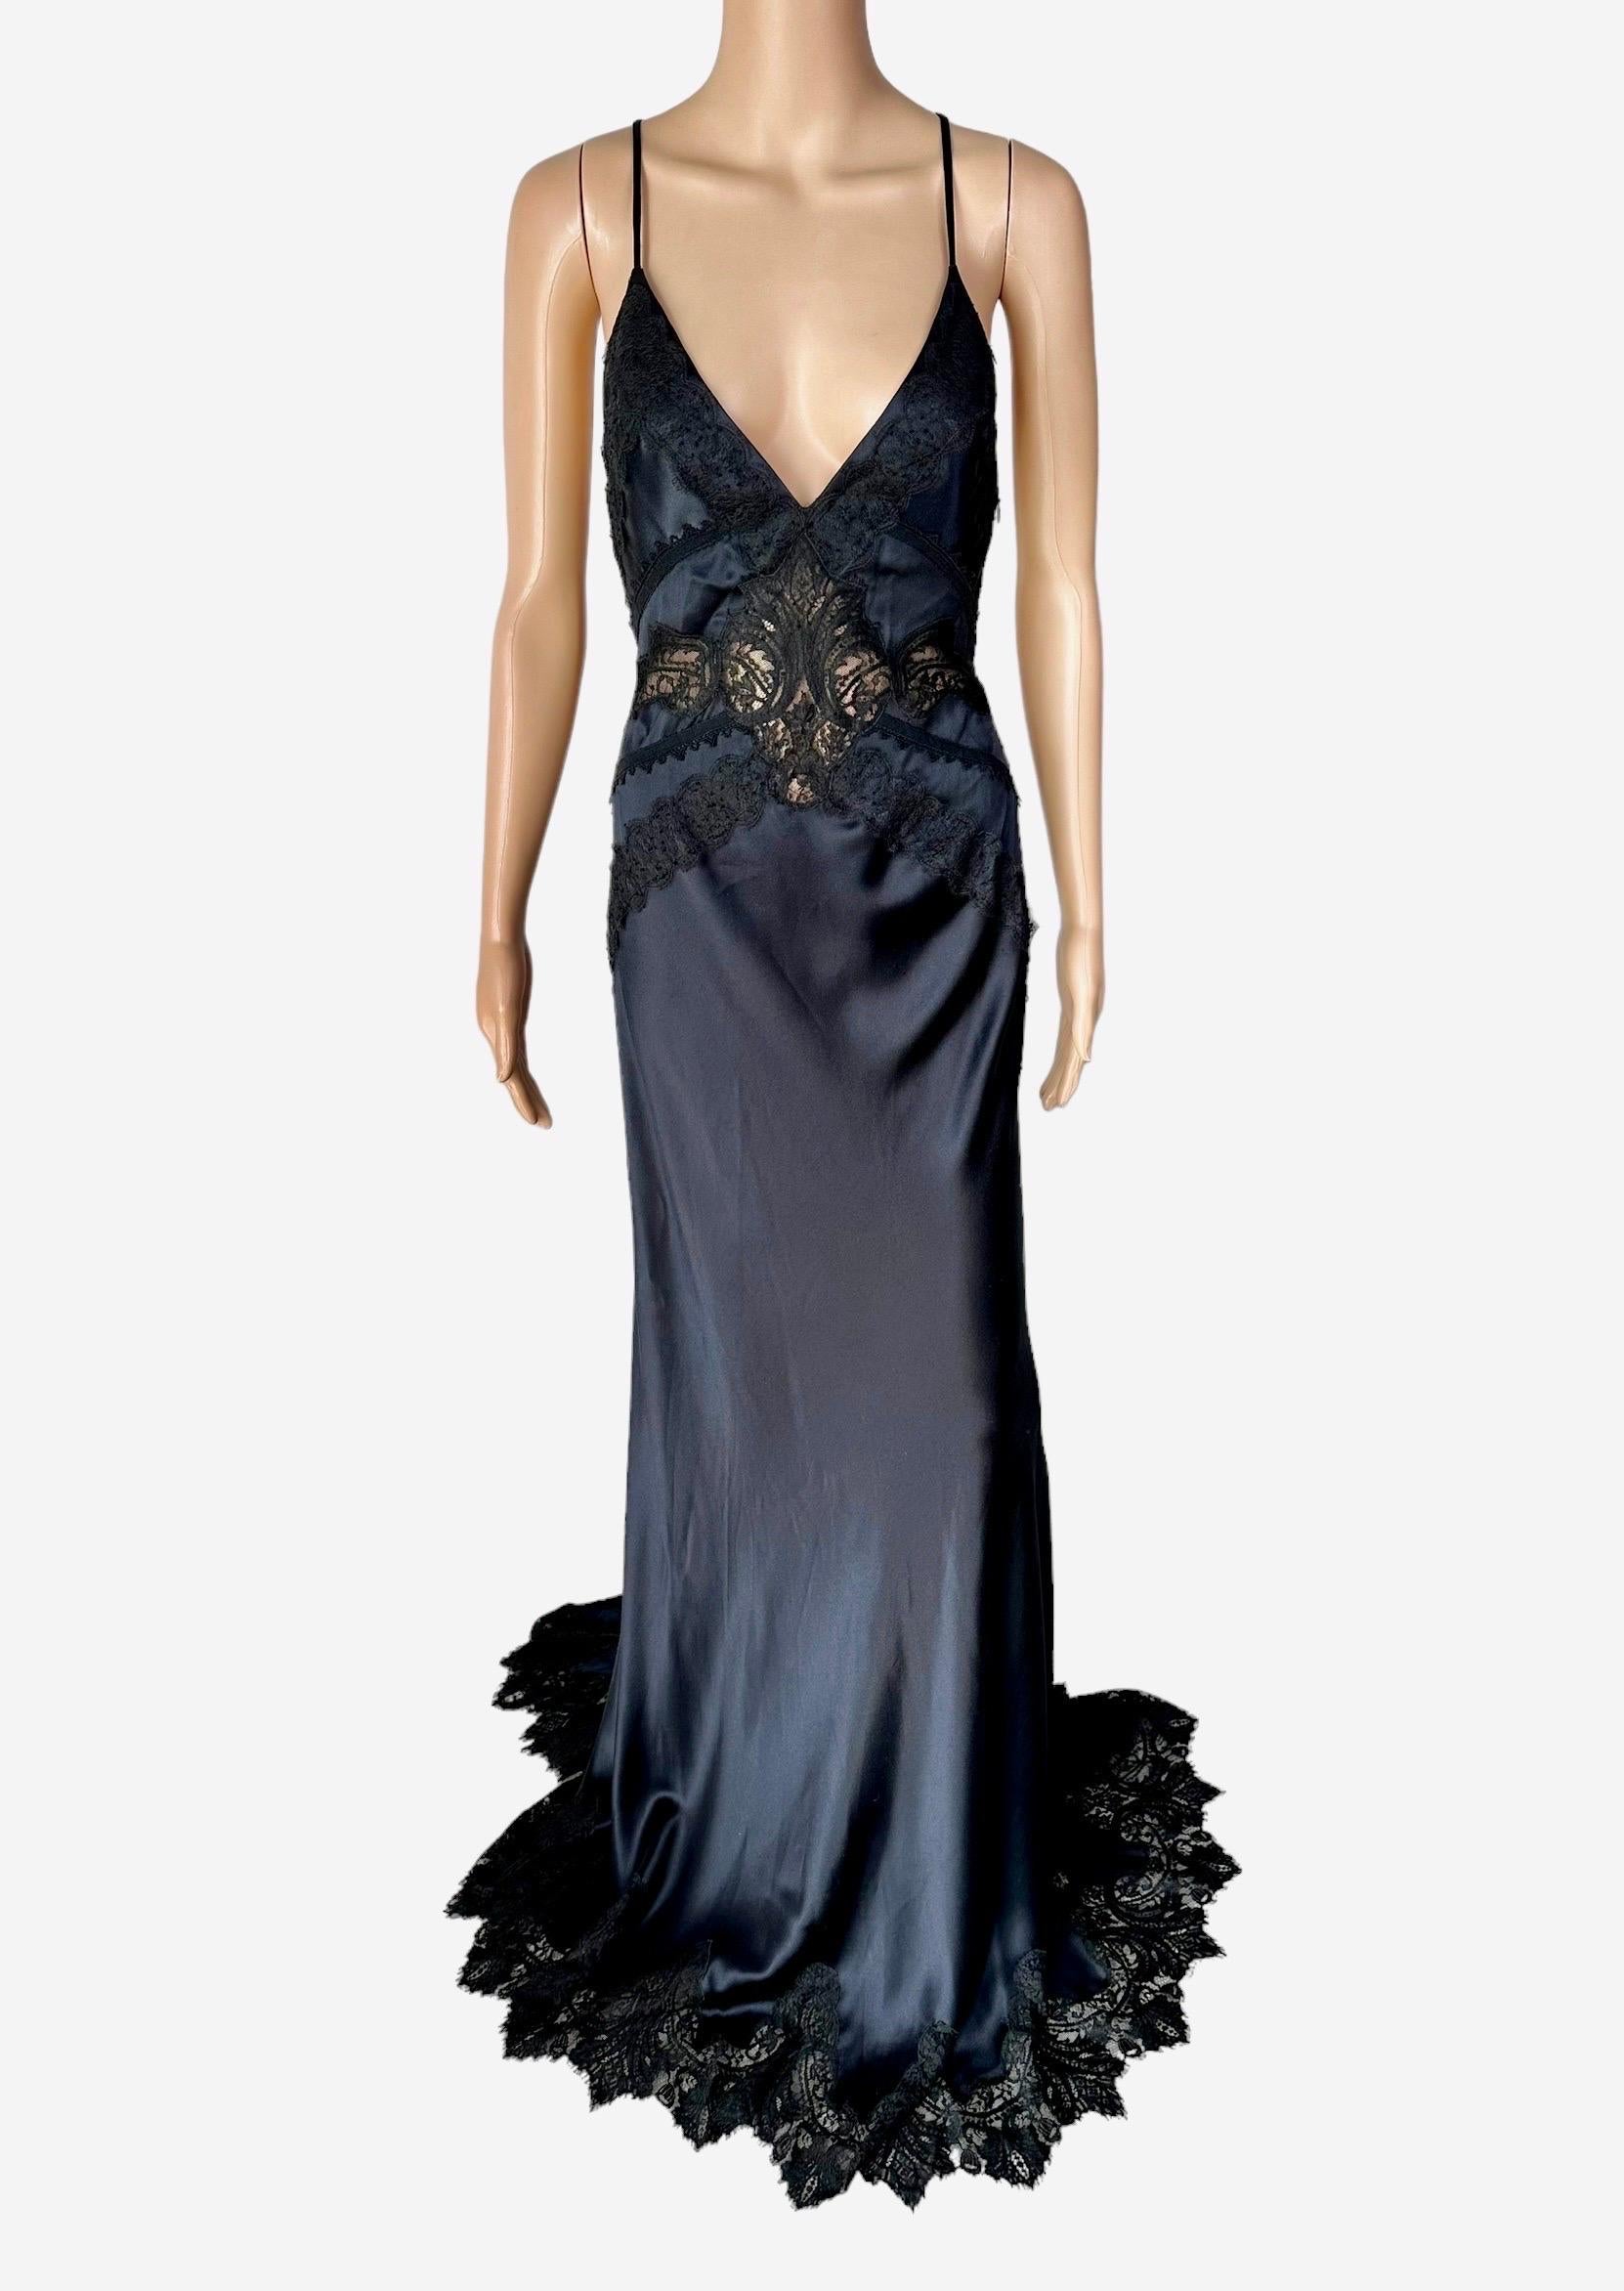 Versace c.2006 Plunging Neckline Sheer Lace Panels Backless Evening Dress Gown  6